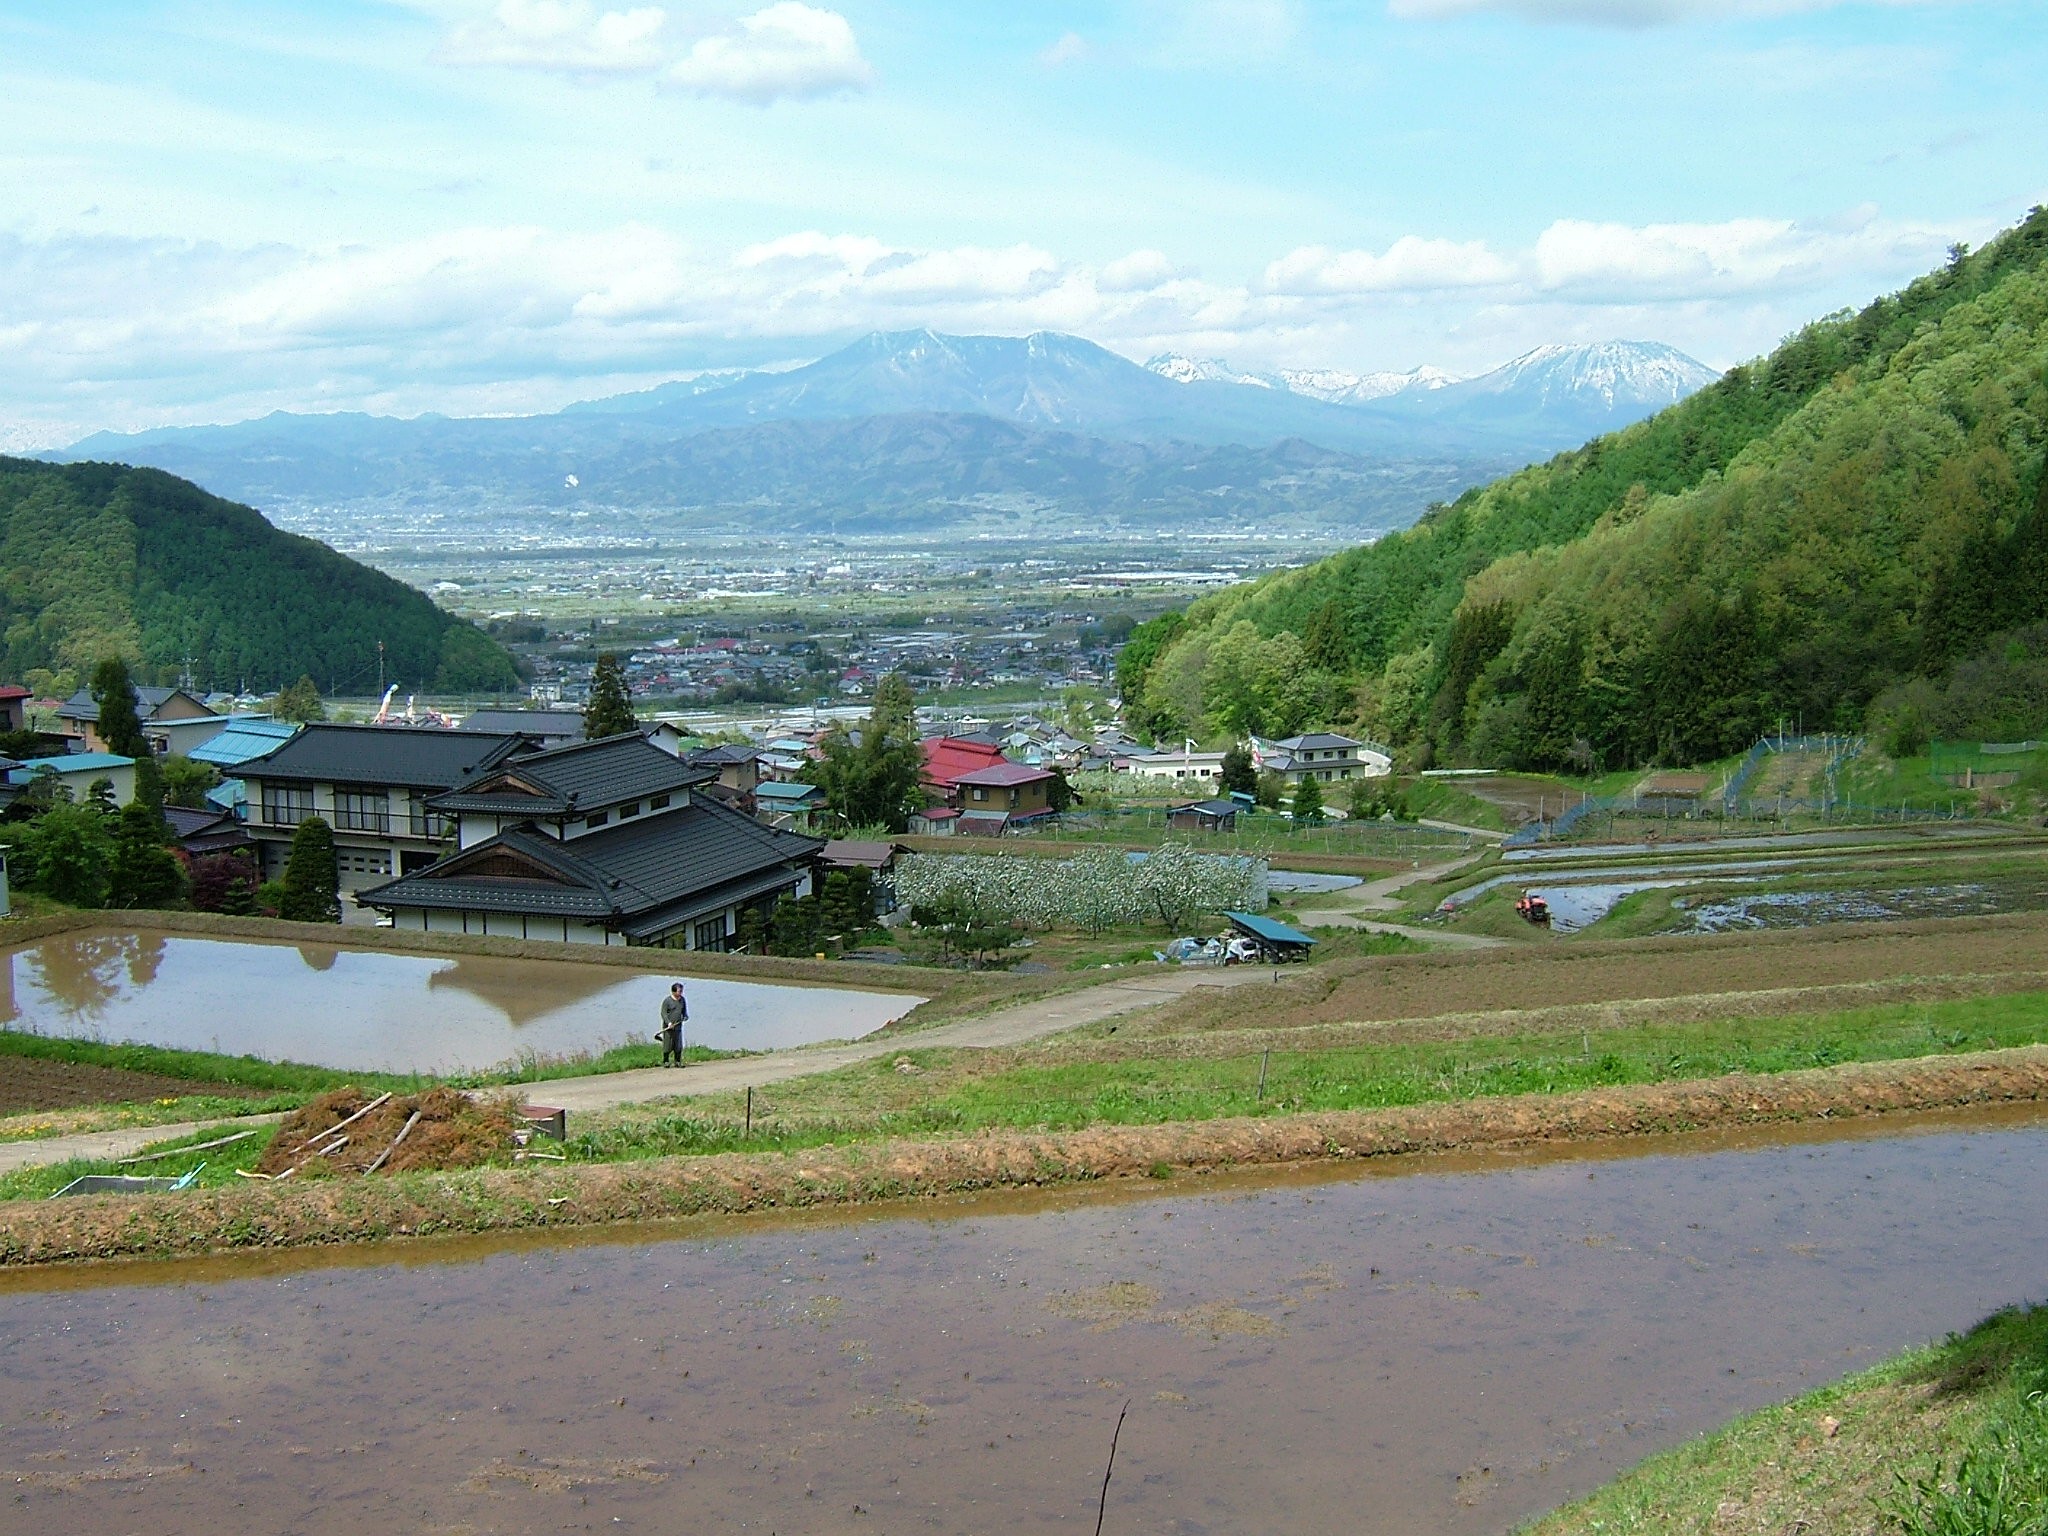 What kind of place is Takayama Village in Nagano Prefecture?